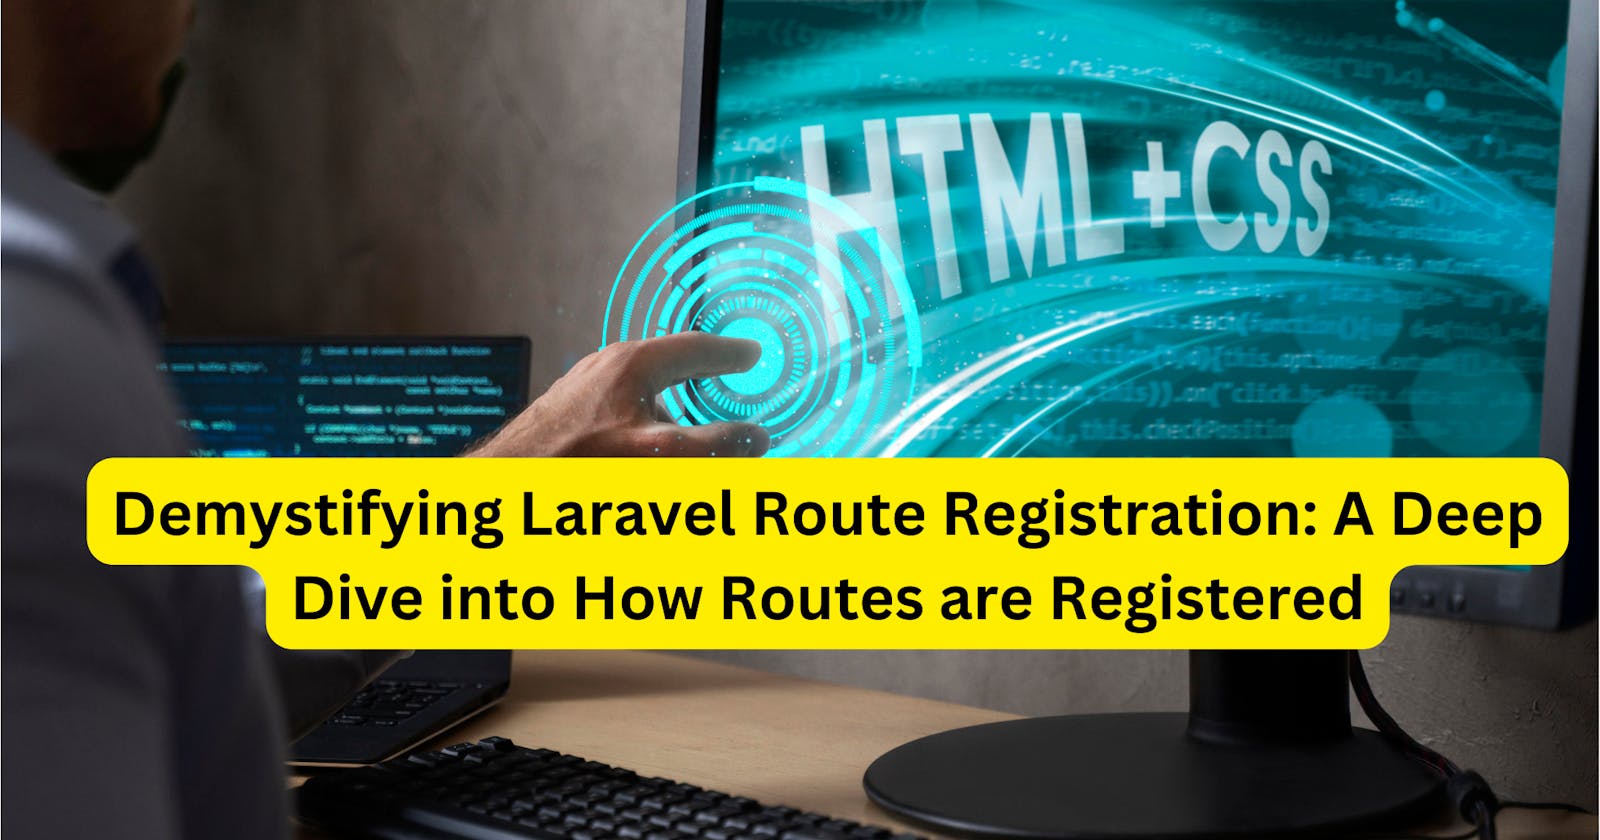 Demystifying Laravel Route Registration: A Deep Dive into How Routes are Registered